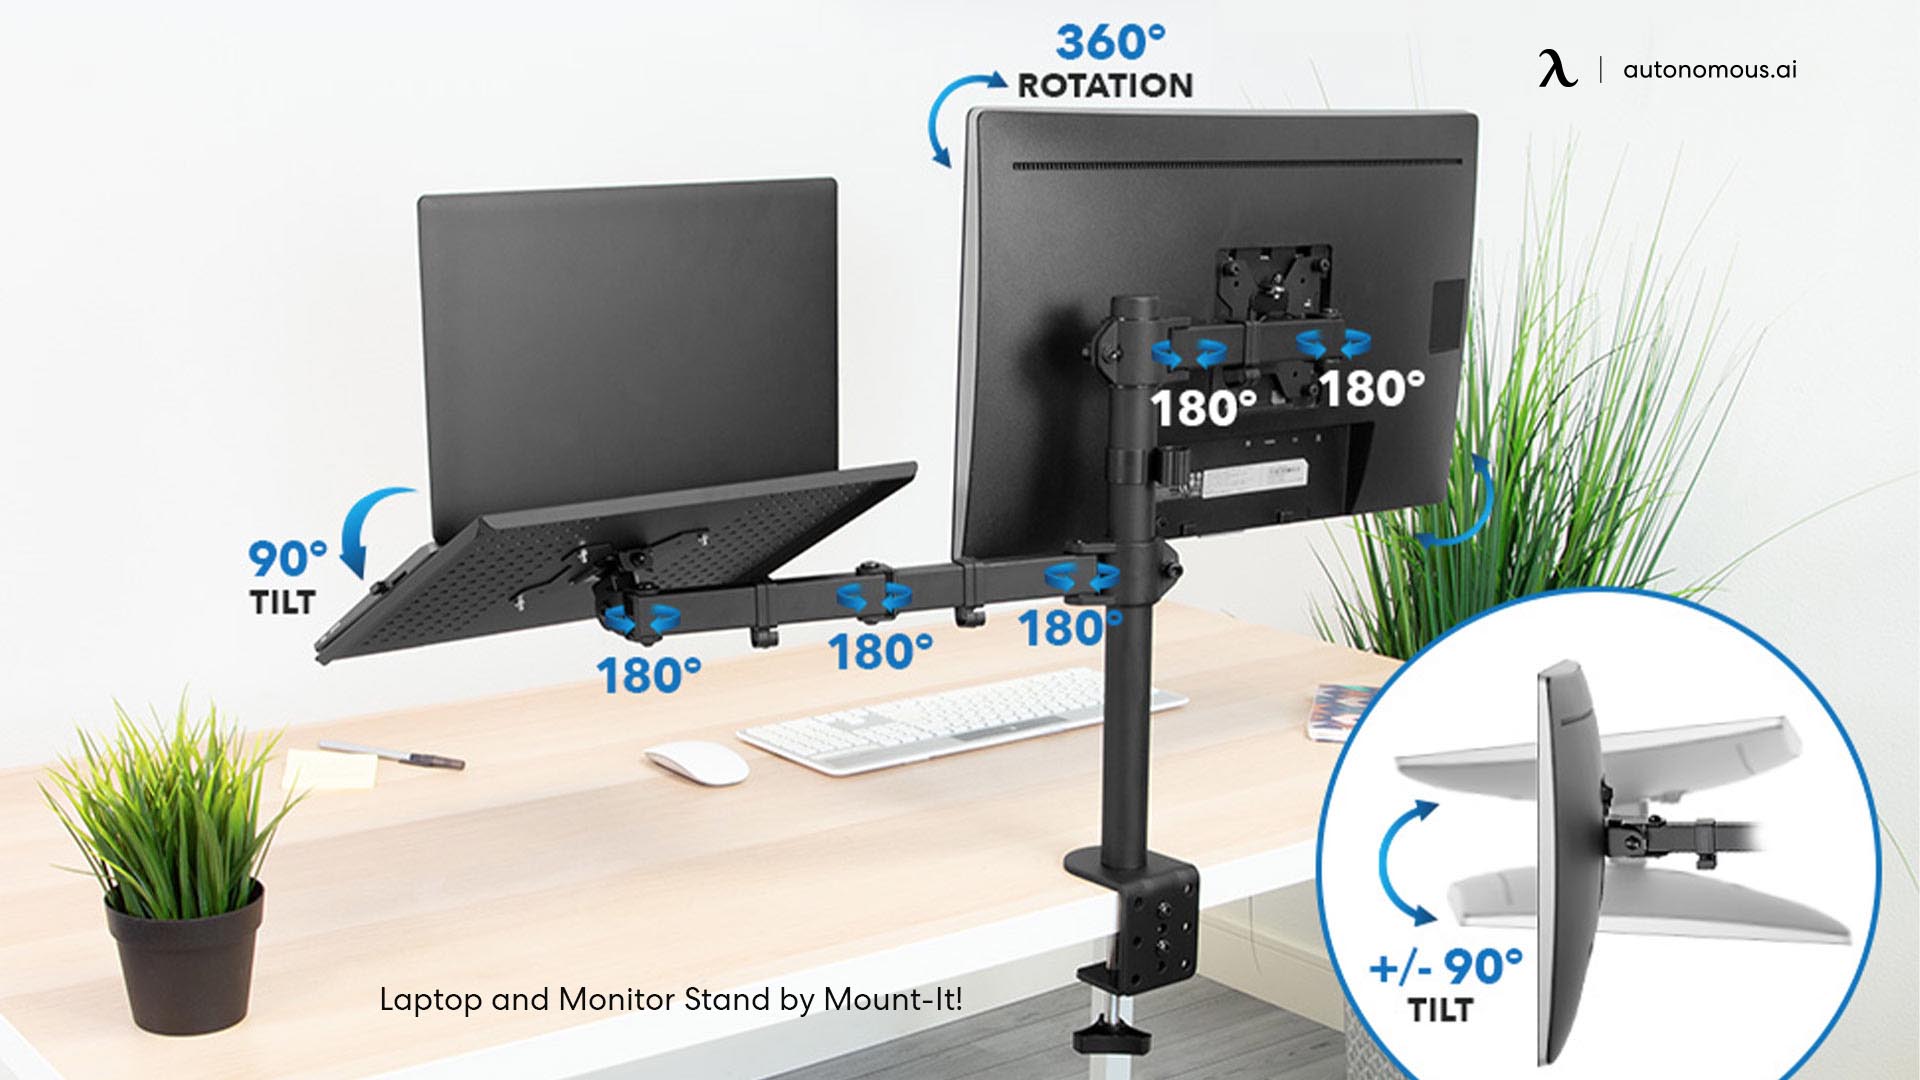 Mount-It! Laptop and Monitor Stand